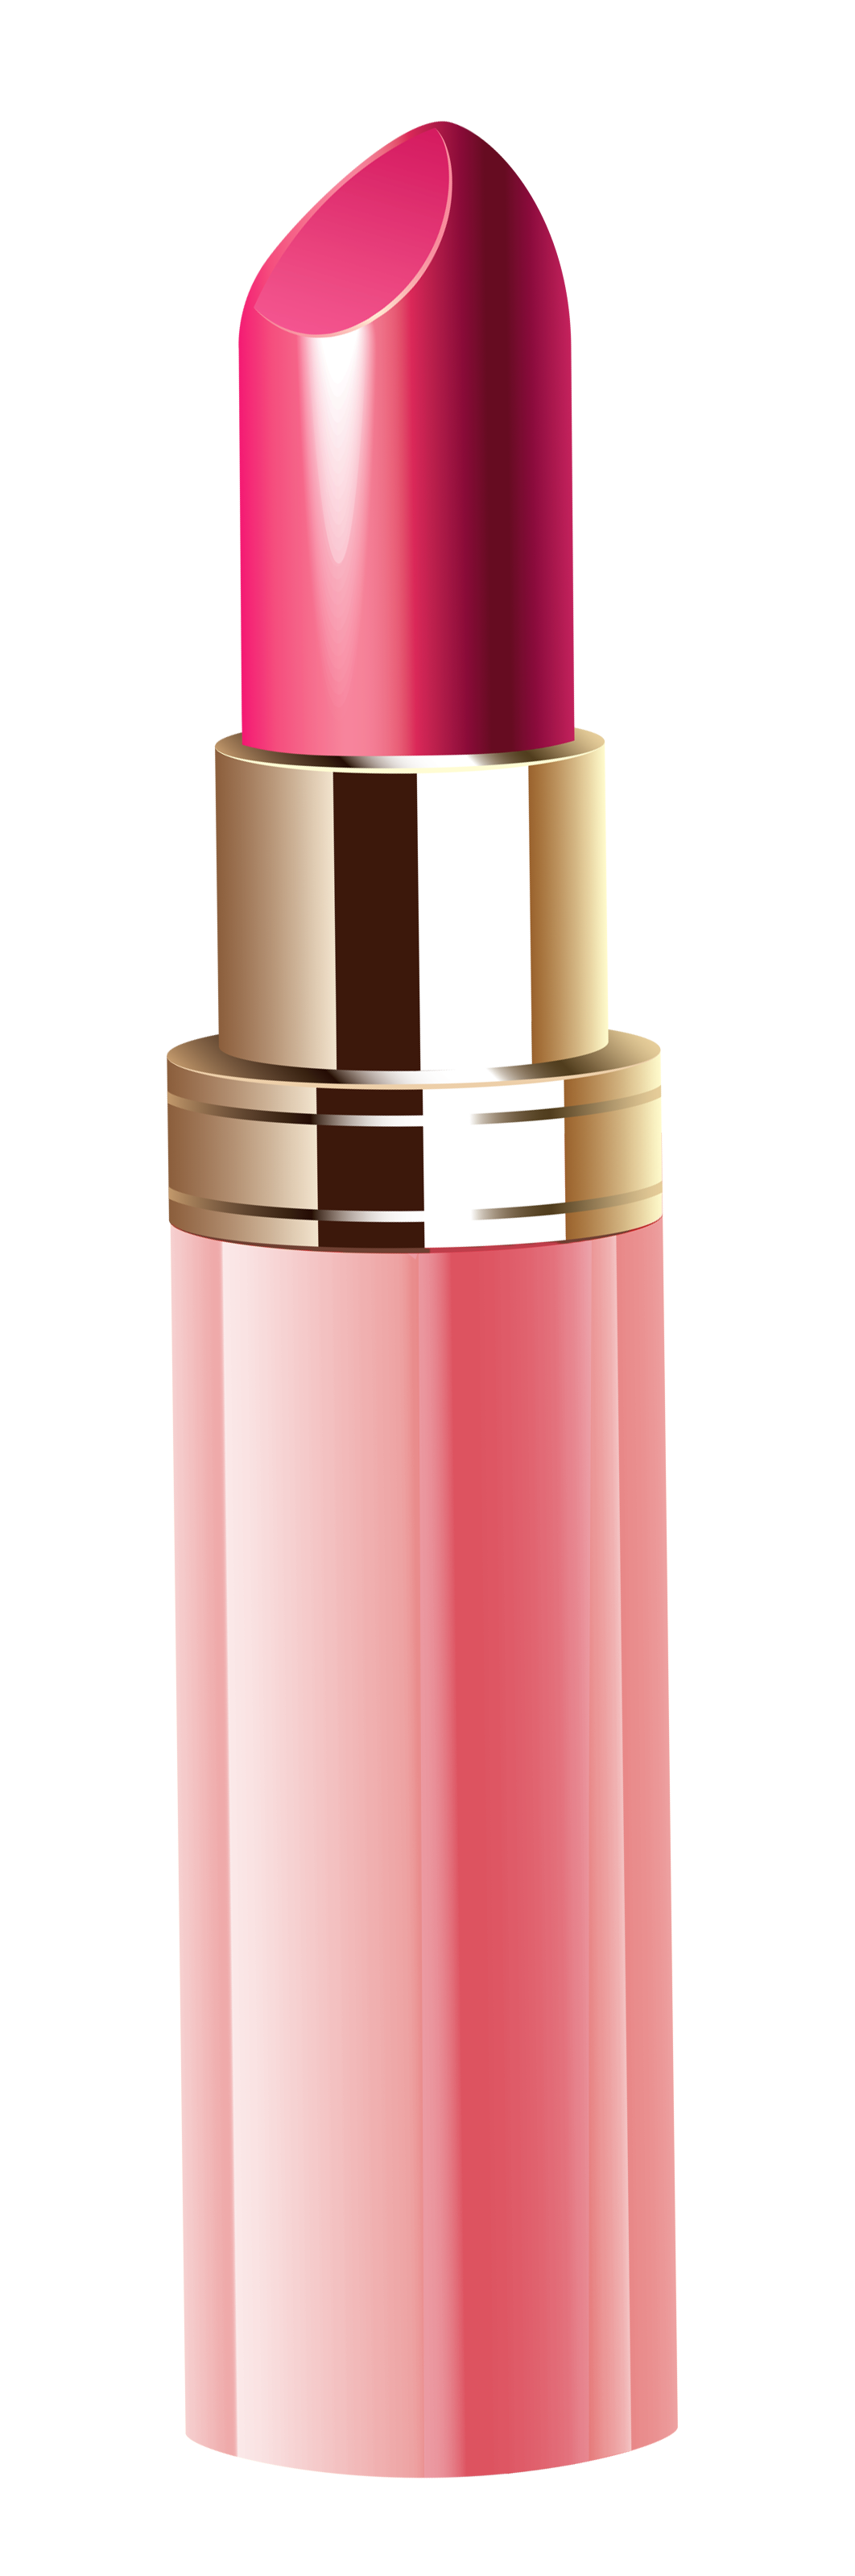 Pink lipstick clipart image 